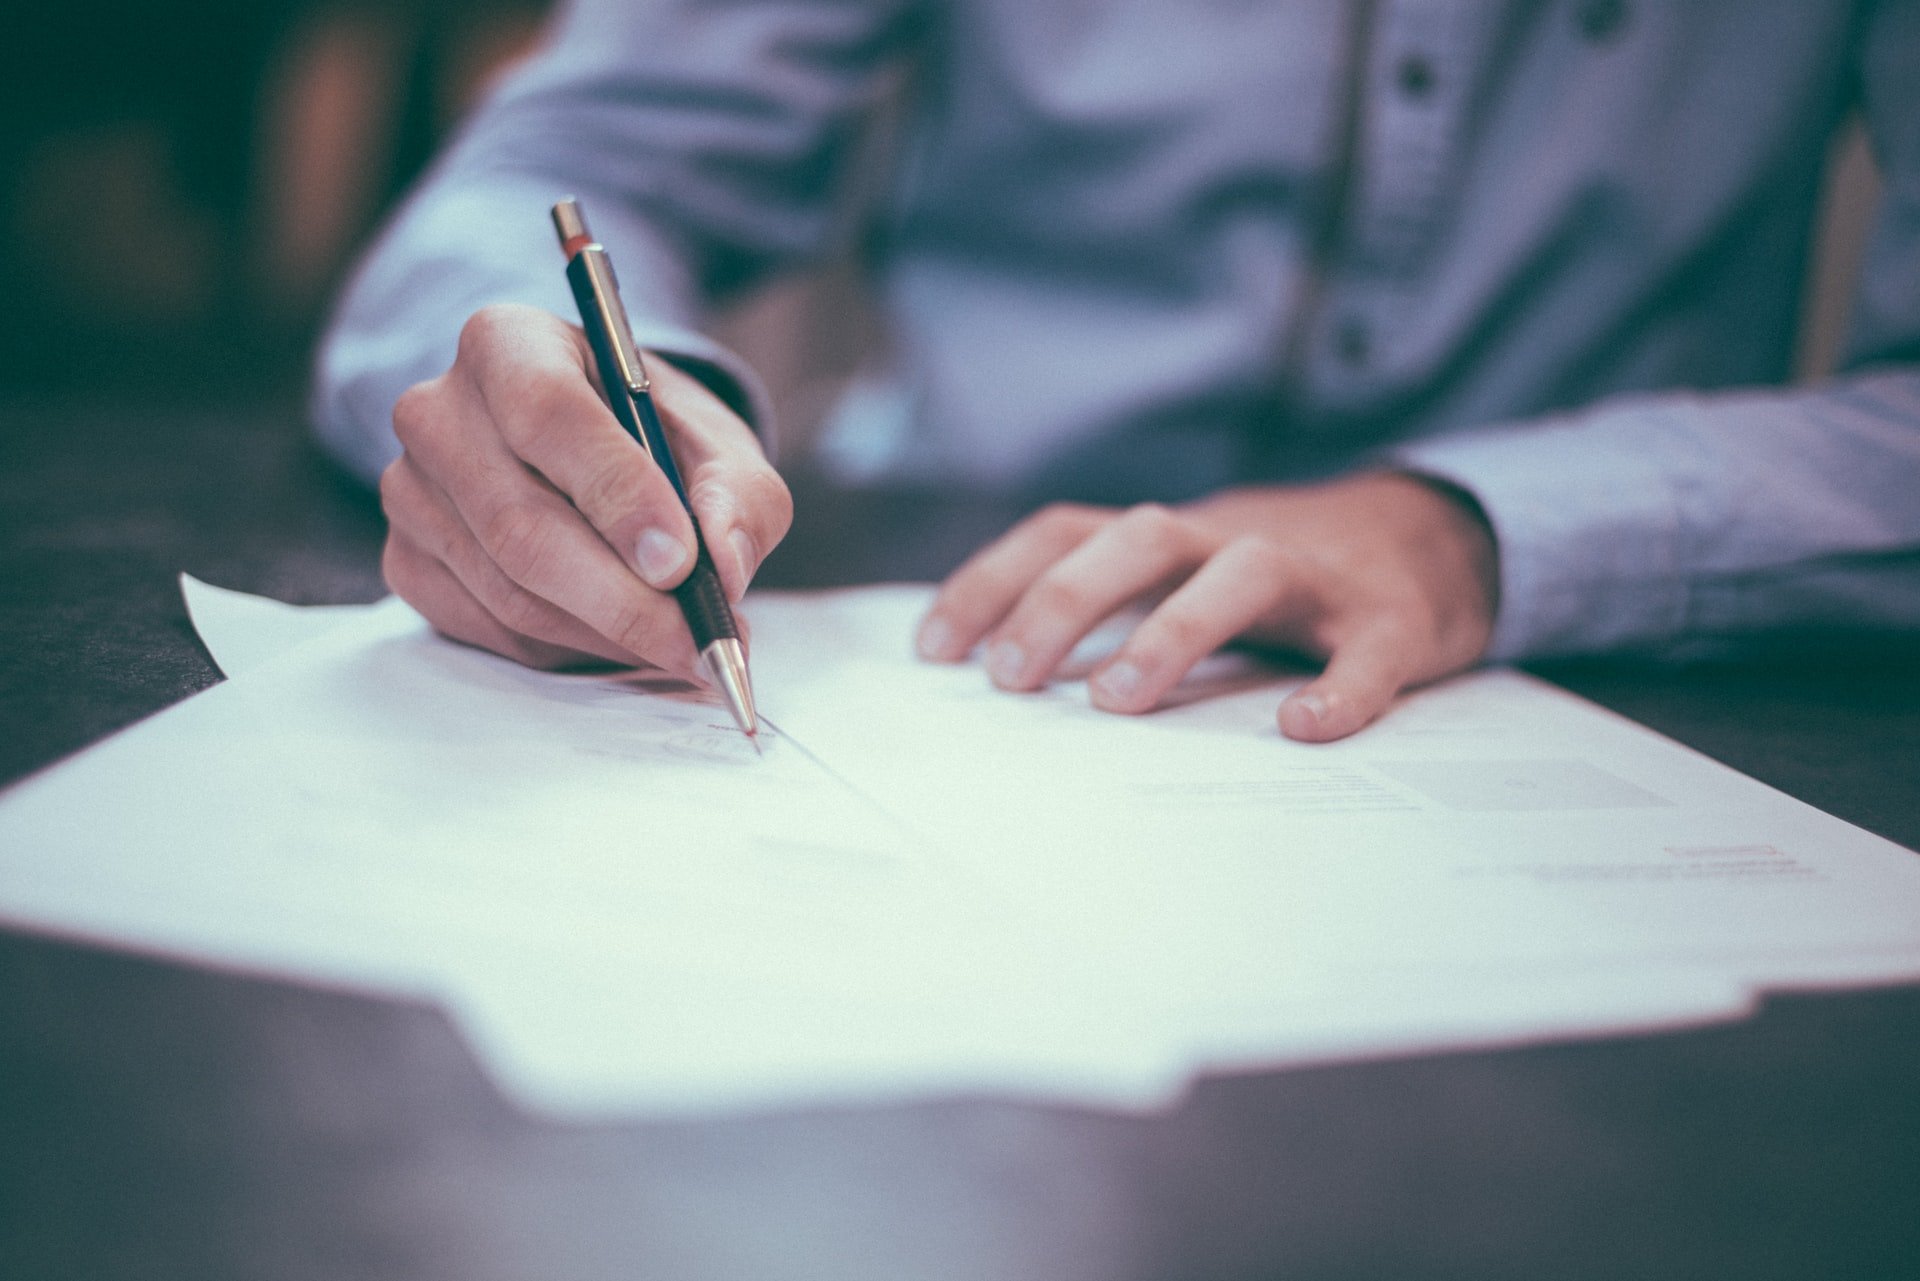 The CEO made a new rule that said he would sign every leave form | Source: Unsplash